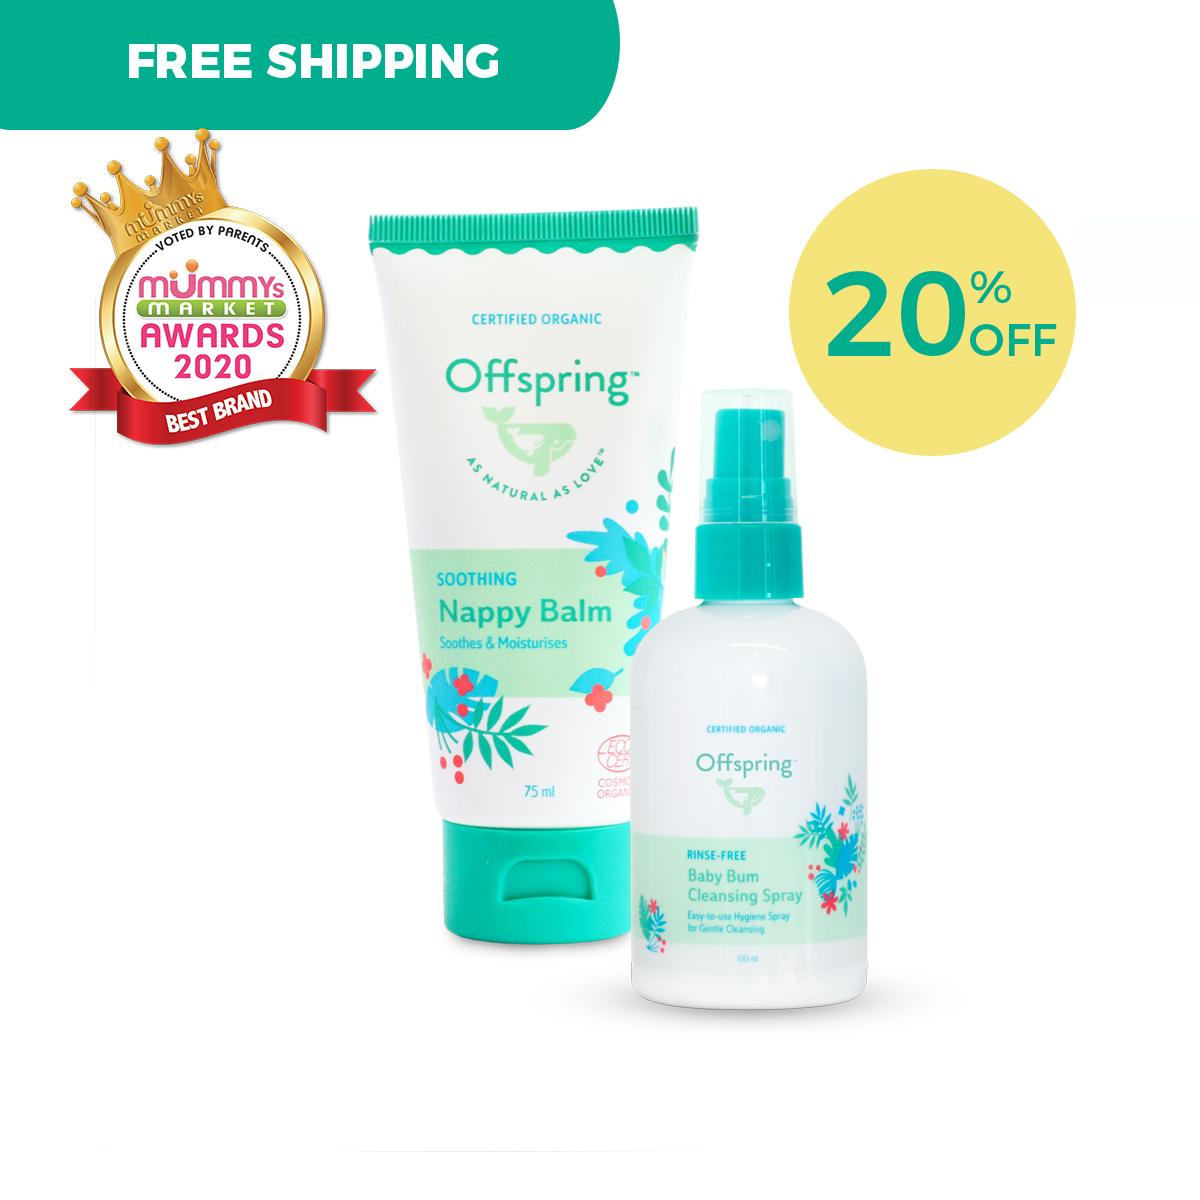 Offspring Rinse-free Baby Bum Cleansing Spray with Soothing Nappy Balm